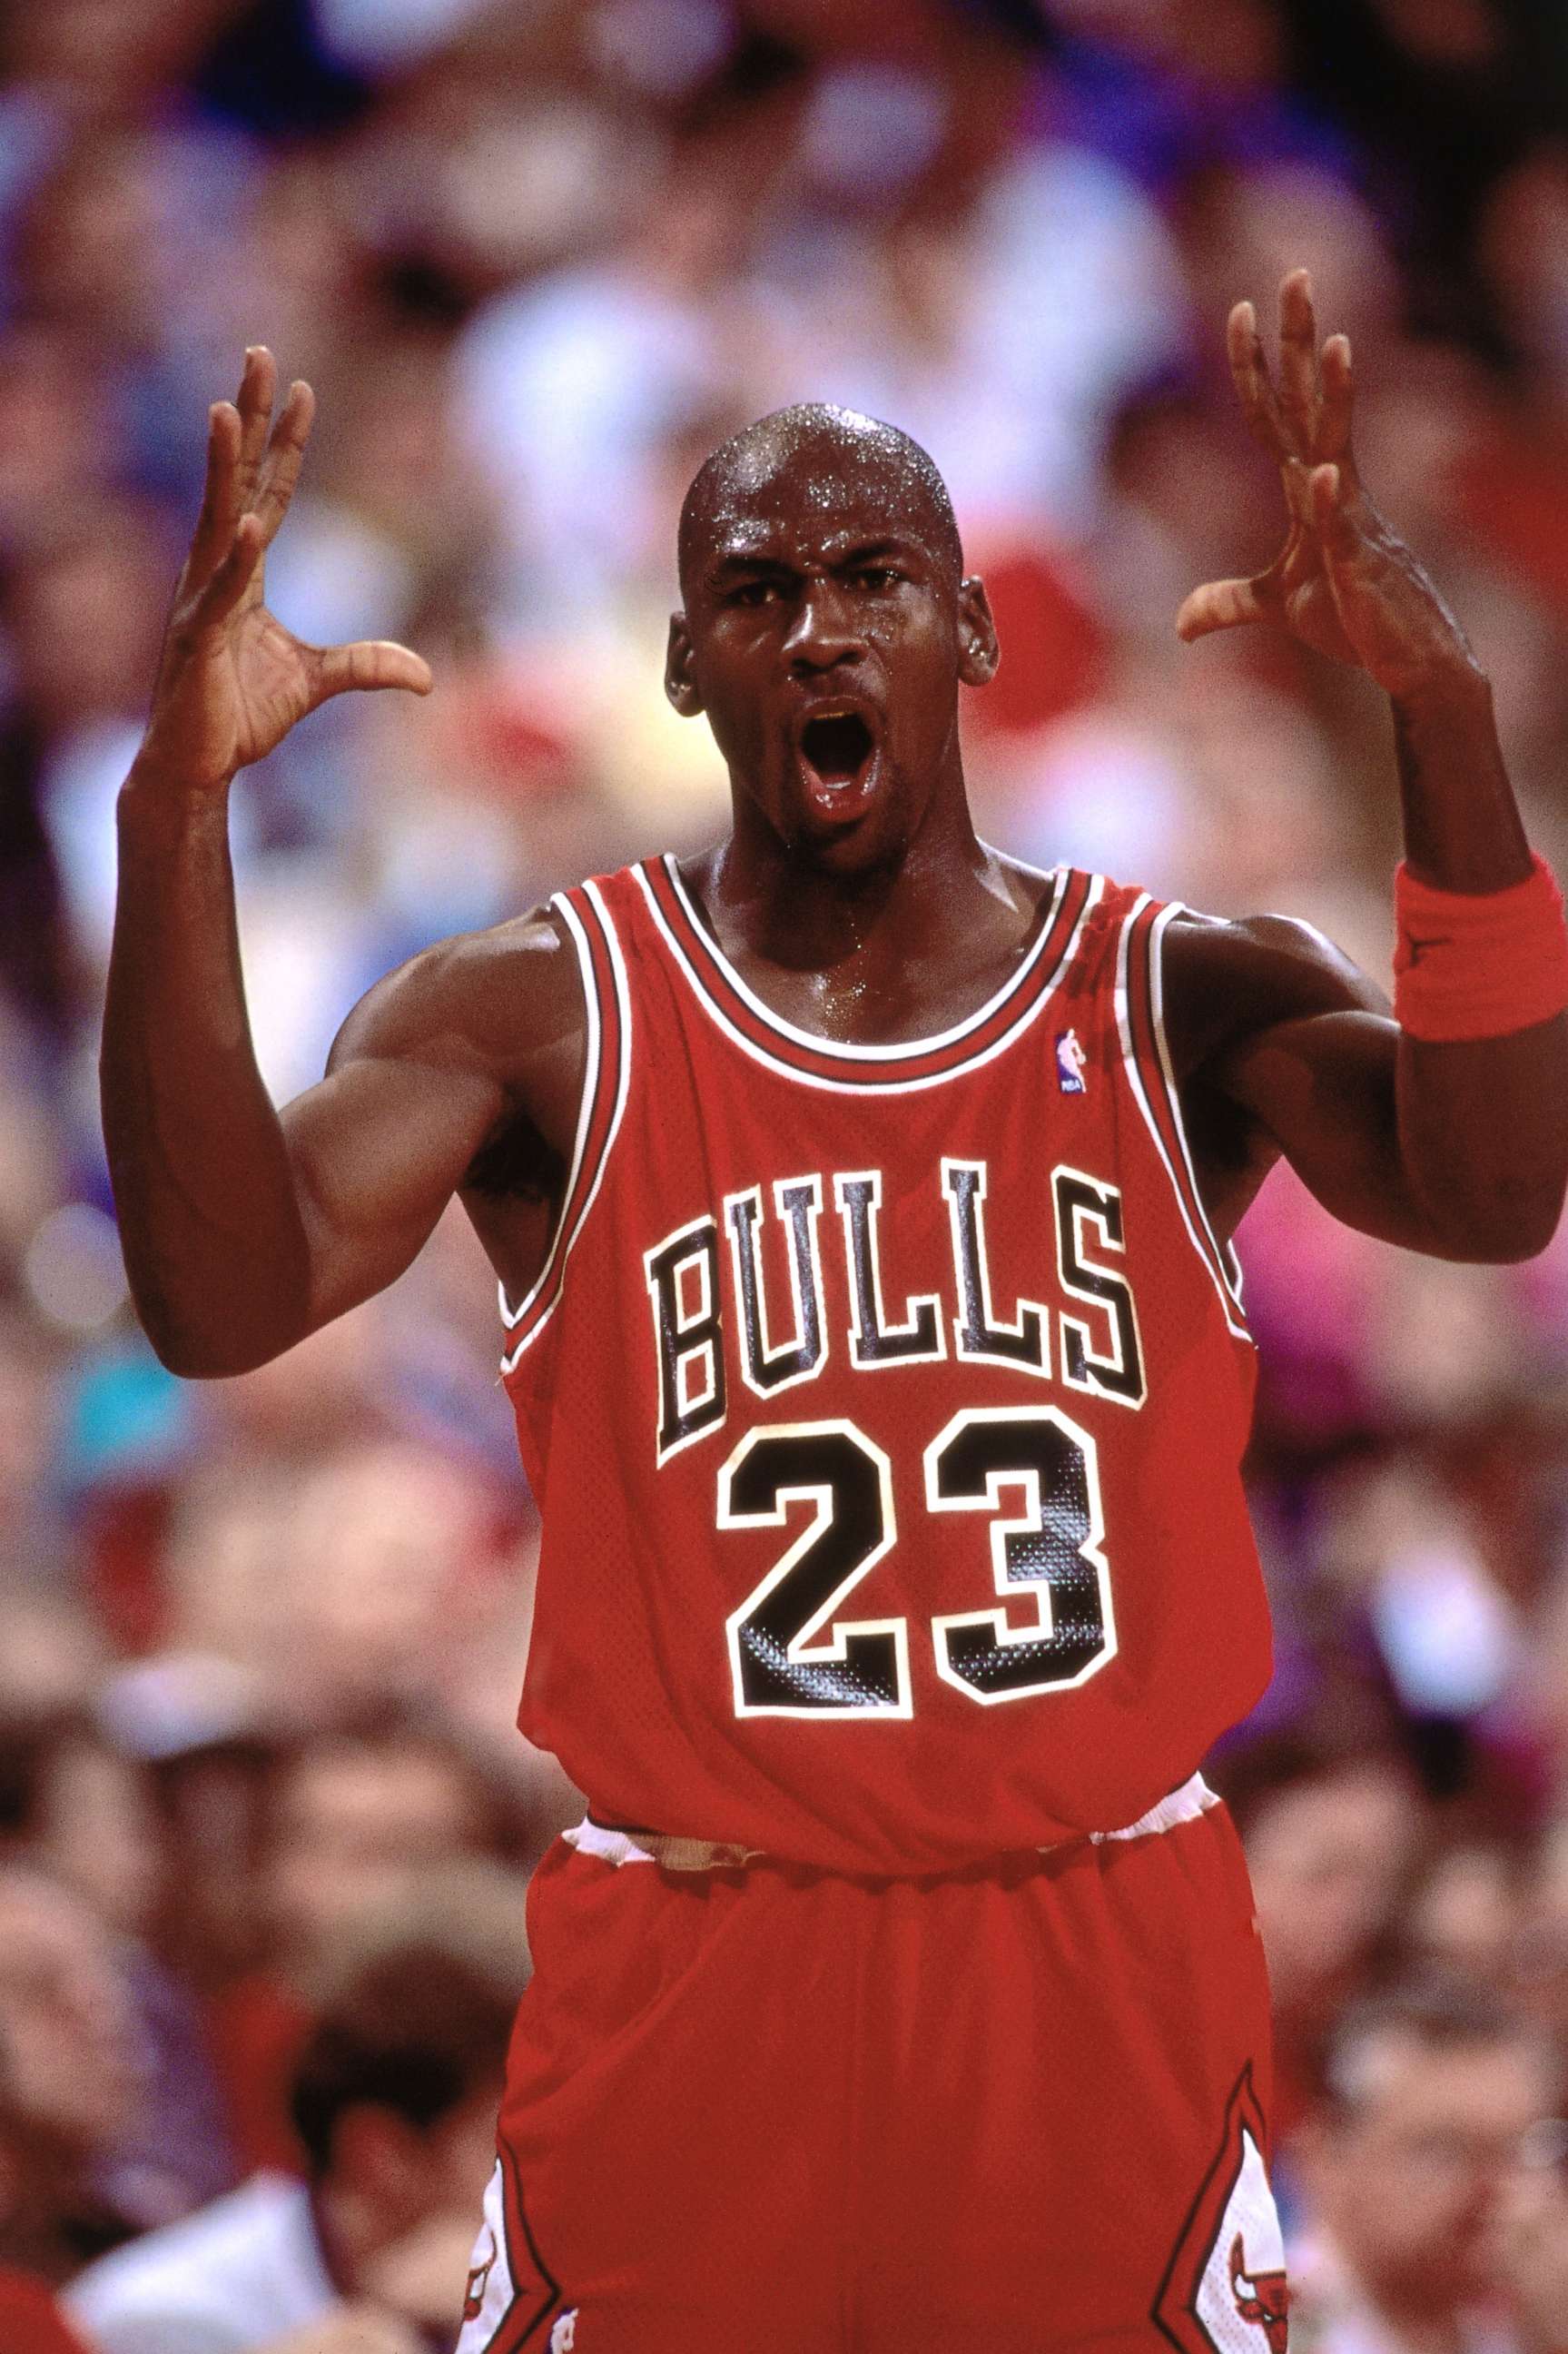 PHOTO: Michael Jordan #23 of the Chicago Bulls shows emotion against the Portland Trailblazers during a game played at the Veterans Memorial Coliseum in Portland, Ore., circa 1991.